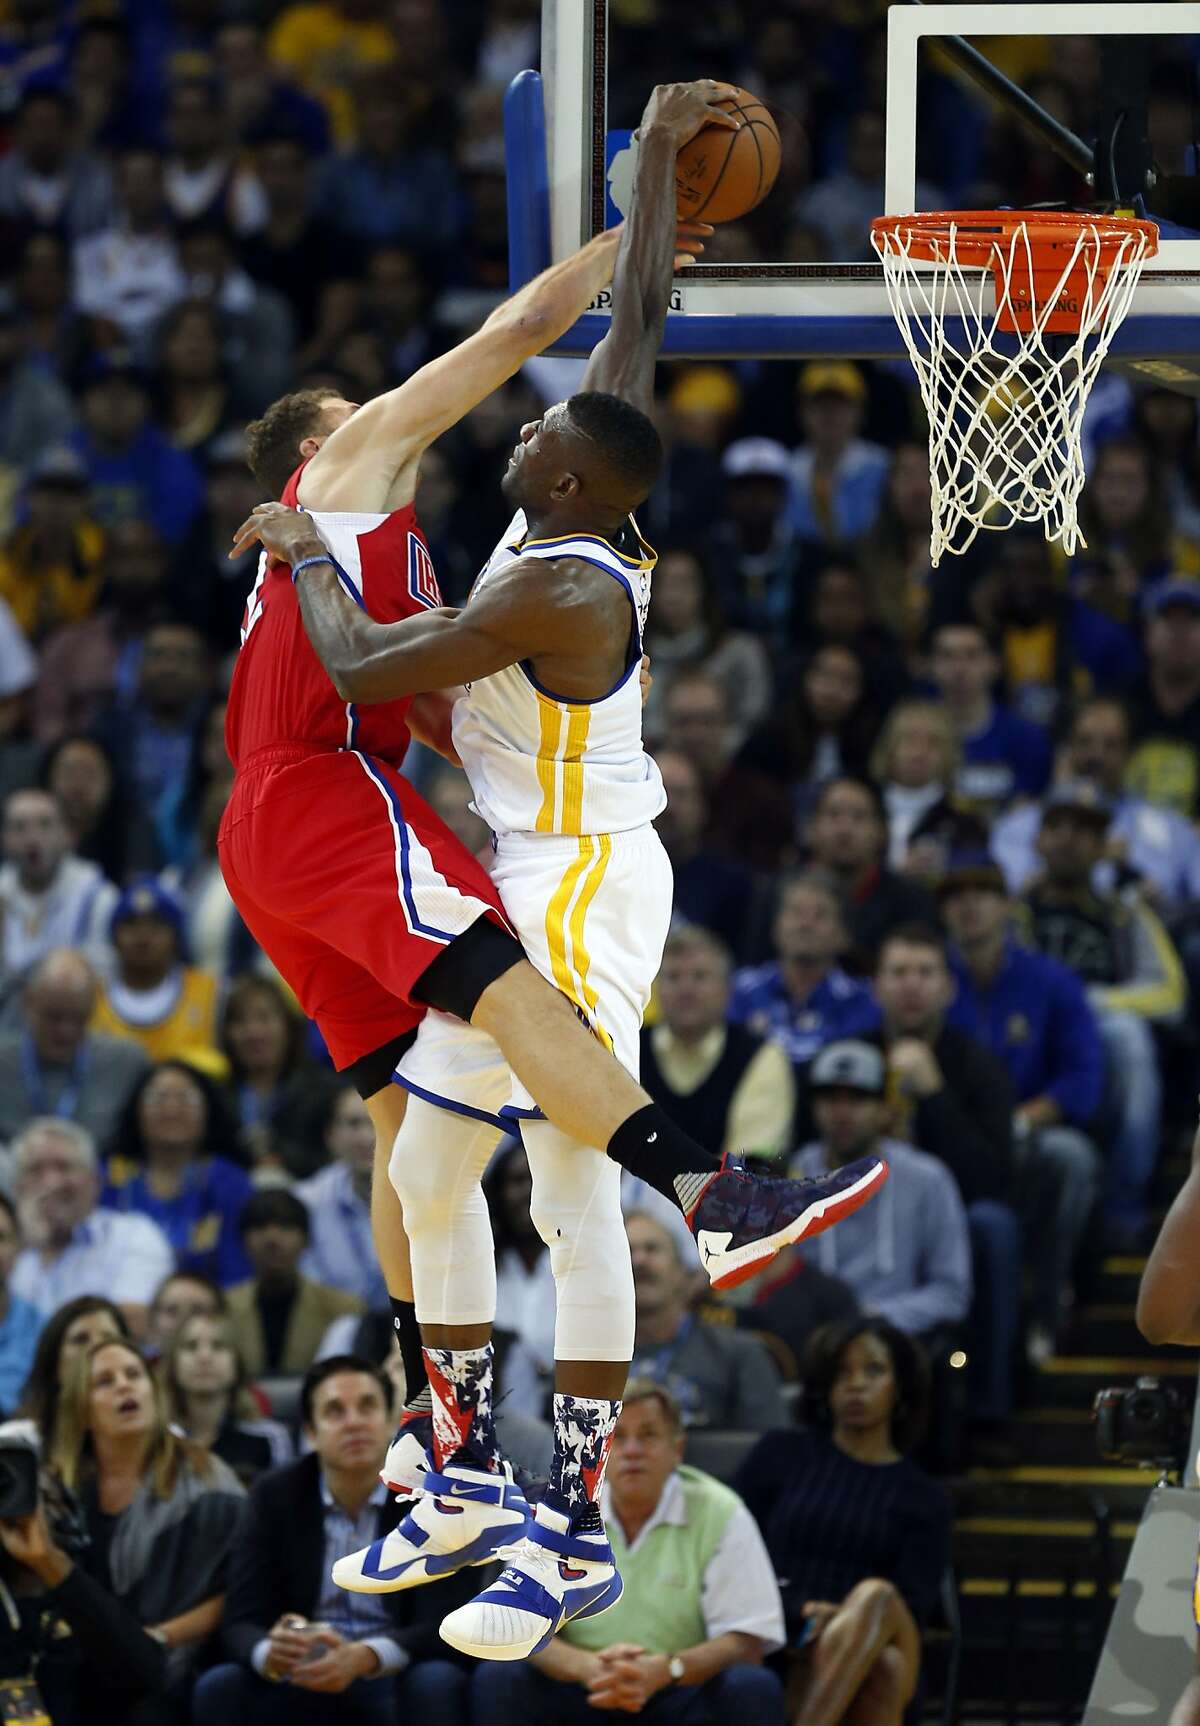 Golden State Warriors' Festus Ezeli blocks a dunk attempt by Los Angeles Clippers' Blake Griffin in 1st quarter during NBA game at Oracle Arena in Oakland, Calif., on Wednesday, November 4, 2015.